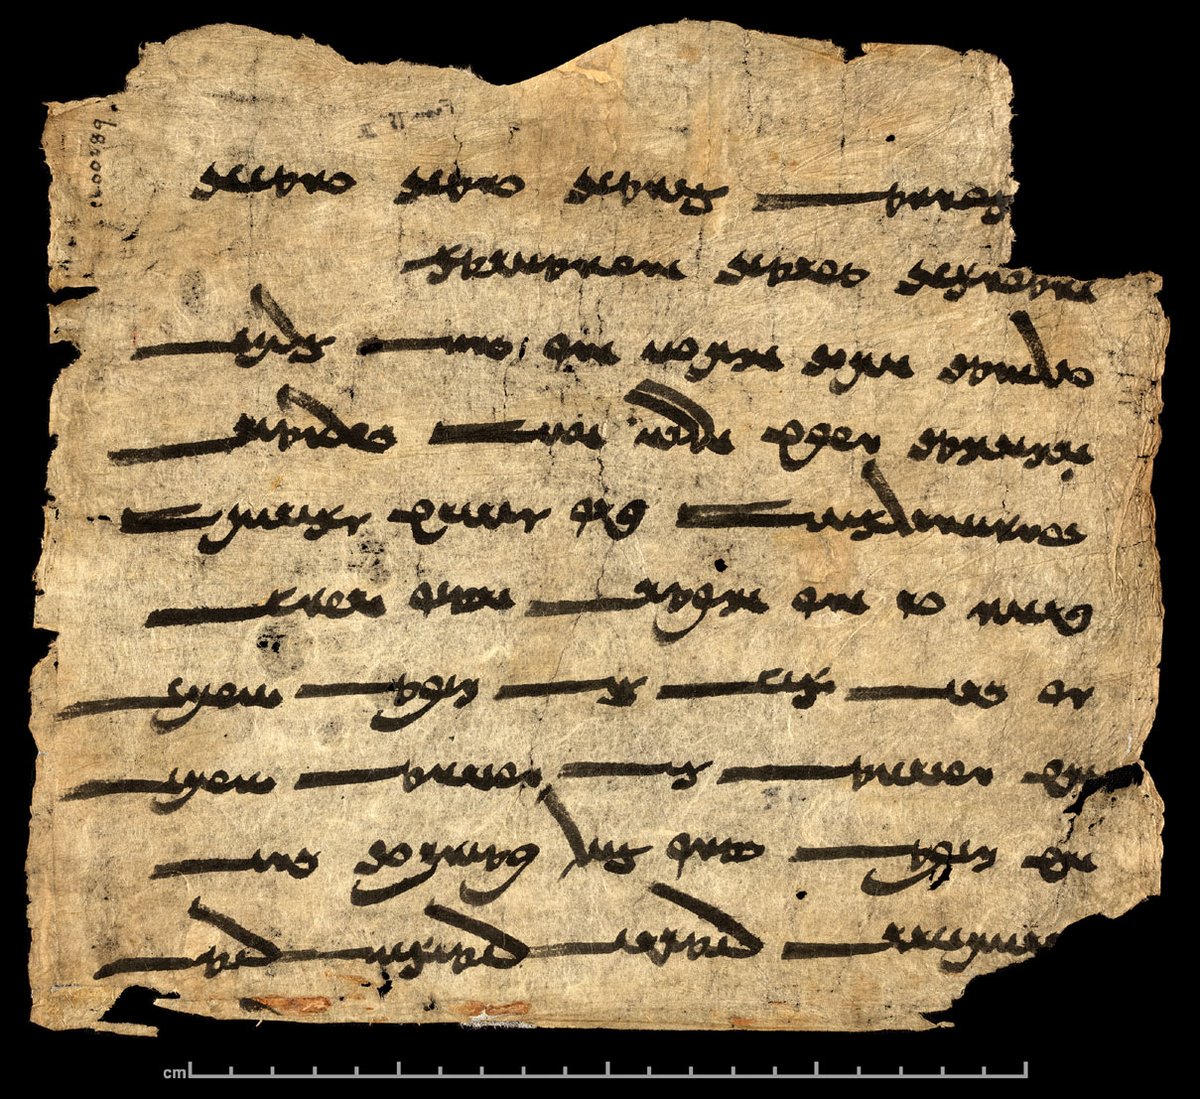 1/14 In manuscript studies, we sometimes encounter a seemingly unintelligible text, the decipherment of which requires a bit stretching of imagination, and the result of which may surprise us all.